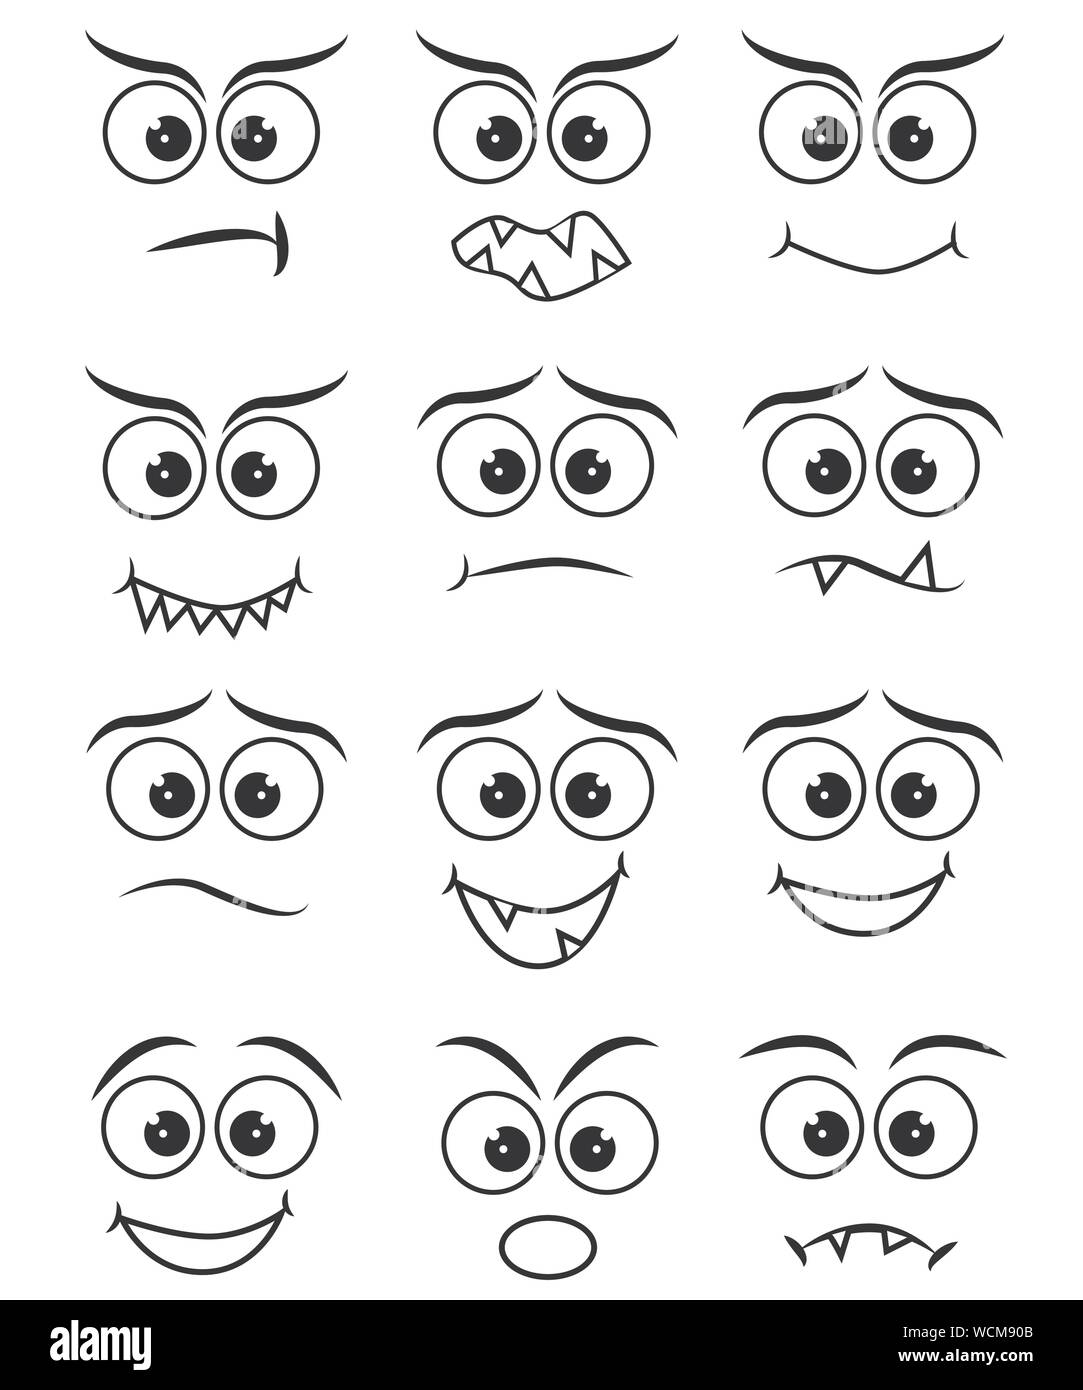 Cartoon faces expression line icons set. Set of emoticons or emoji illustration line icons. Smile icons line art isolated illustration on white backgr Stock Vector